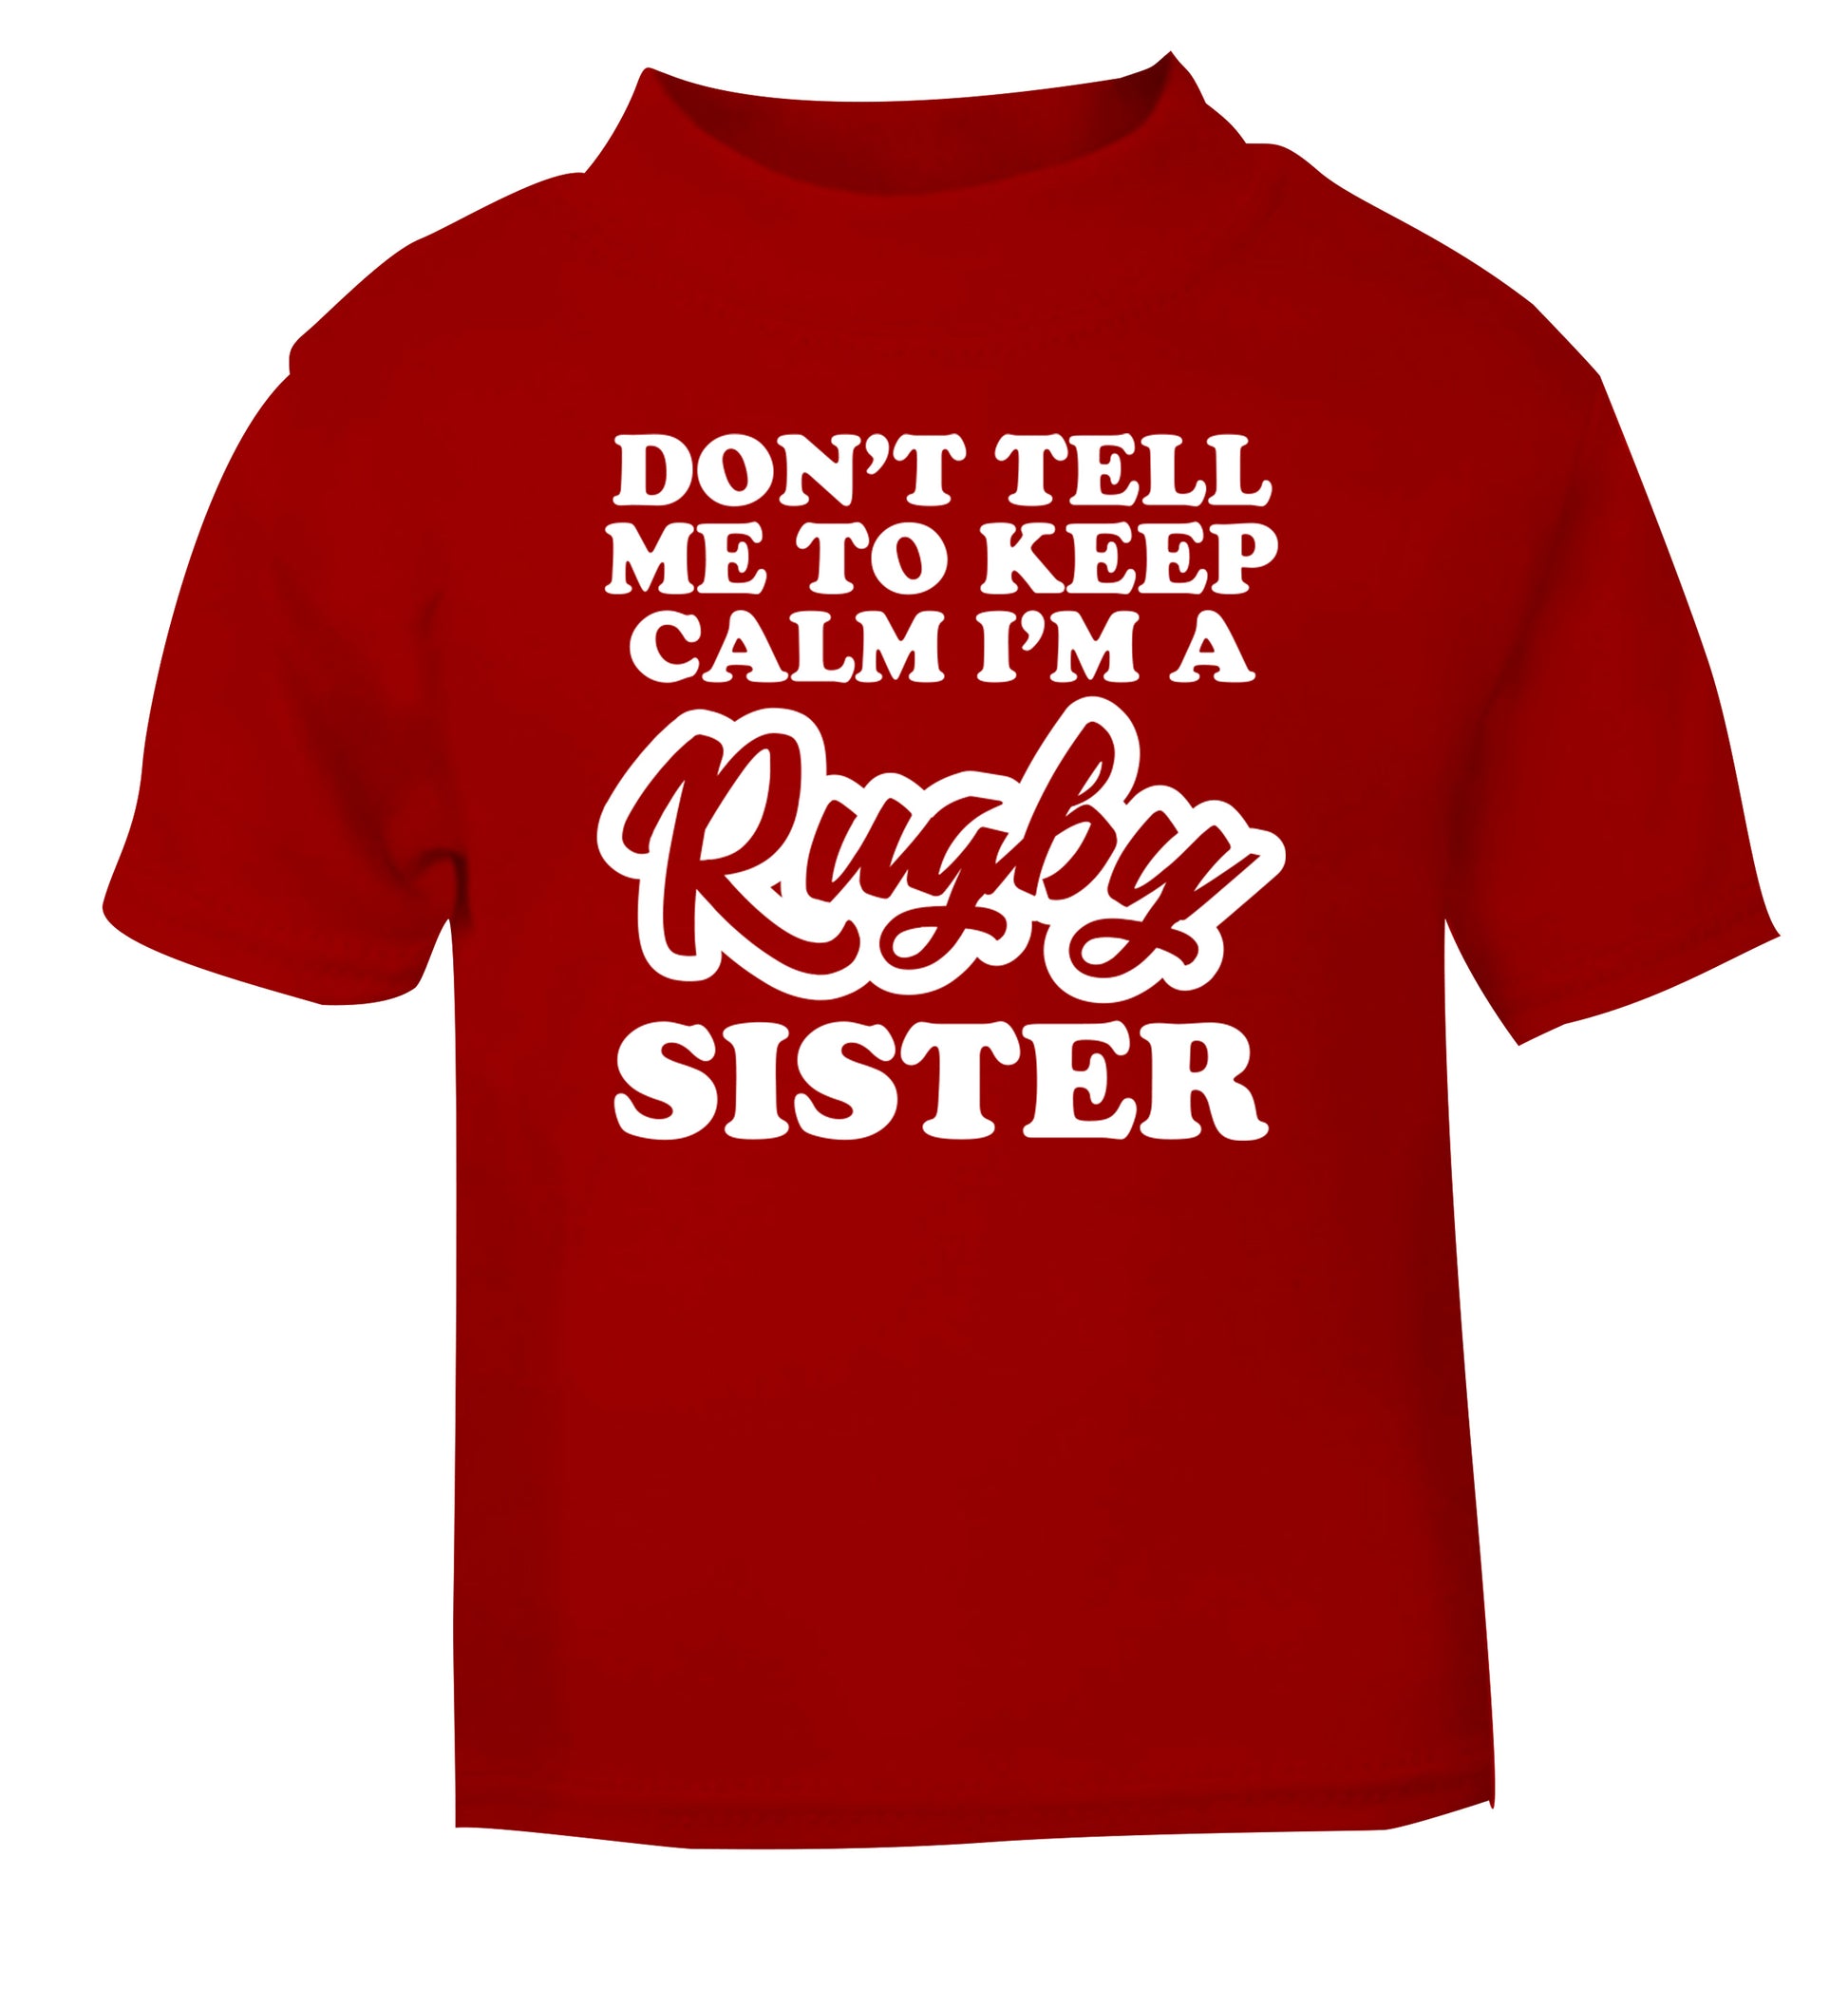 Don't tell me keep calm I'm a rugby sister red Baby Toddler Tshirt 2 Years